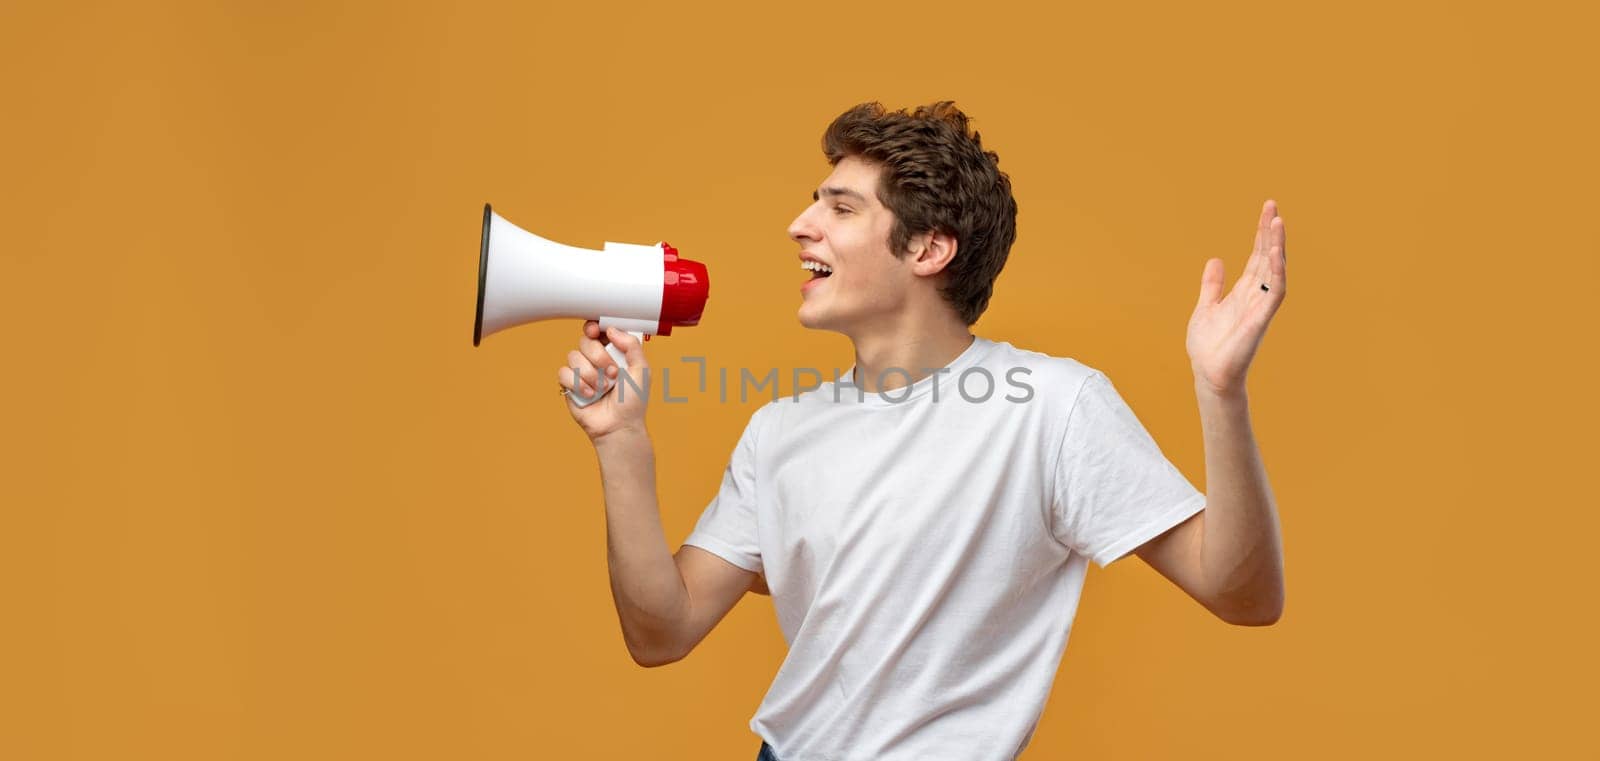 Young man shouting into megaphone making announcement against yellow background by Fabrikasimf